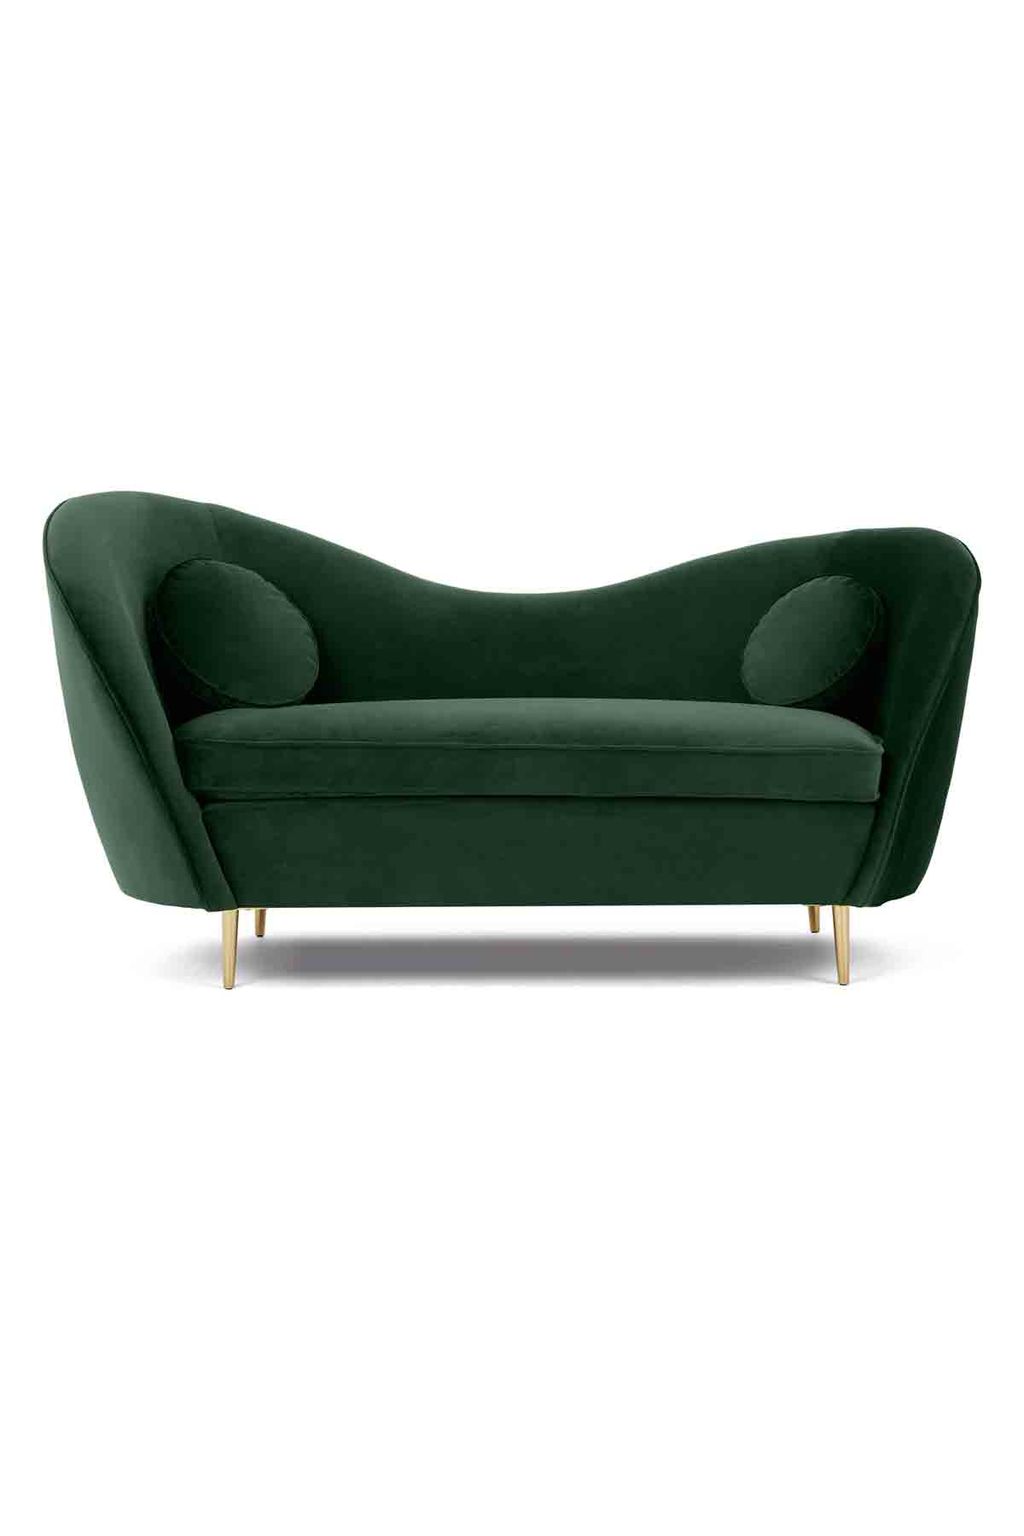 Look Again: 8 of the Best Seriously Sexy Sofas | Livingetc